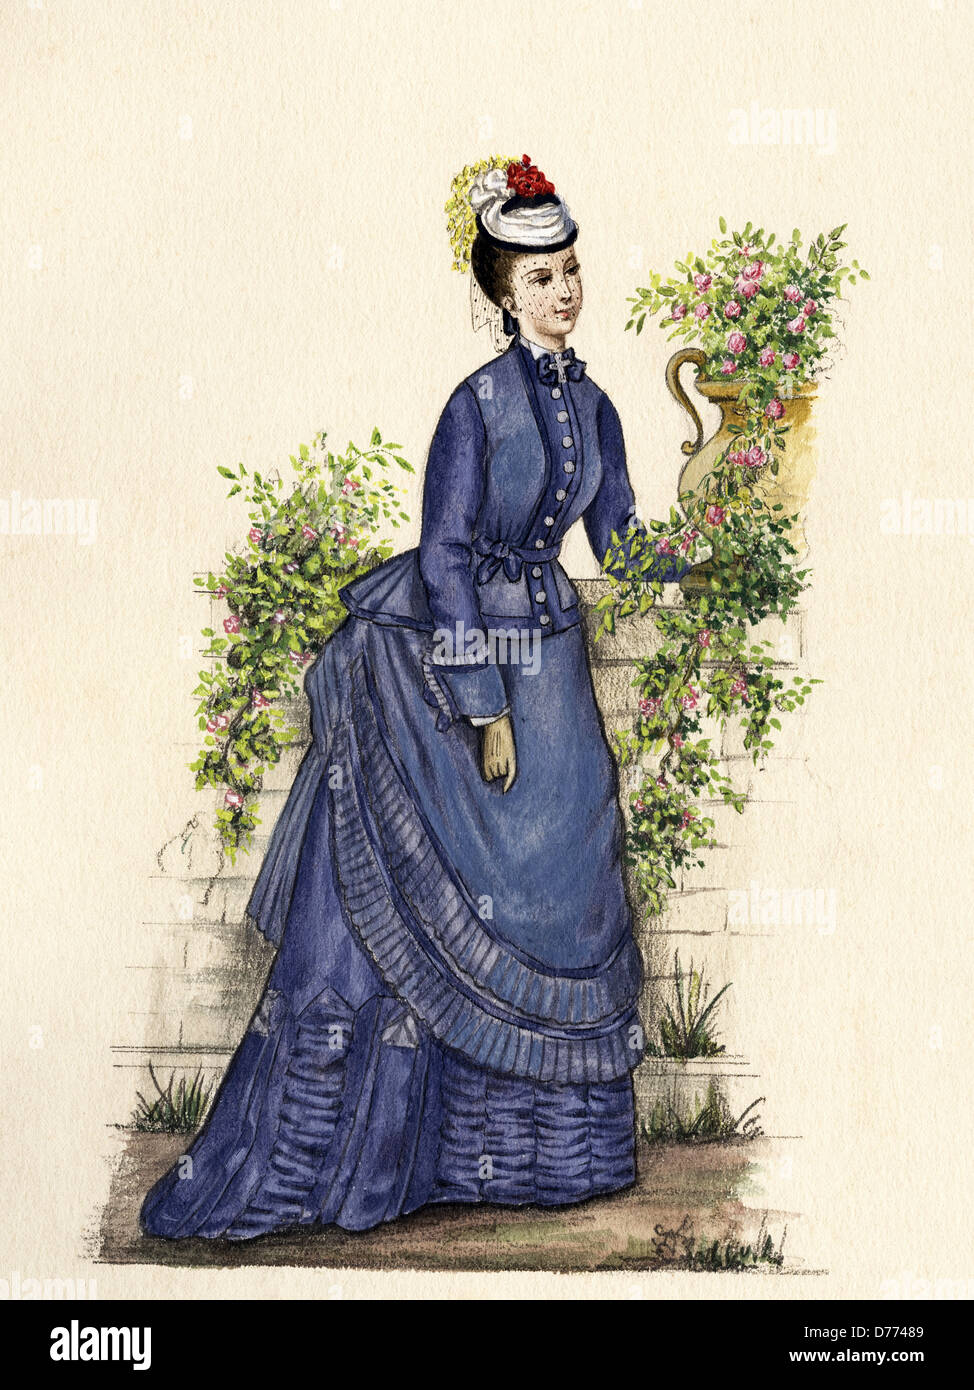 French 19th century fashion from the Victorian era circa 1870s. Original watercolour painting artist unknown Stock Photo